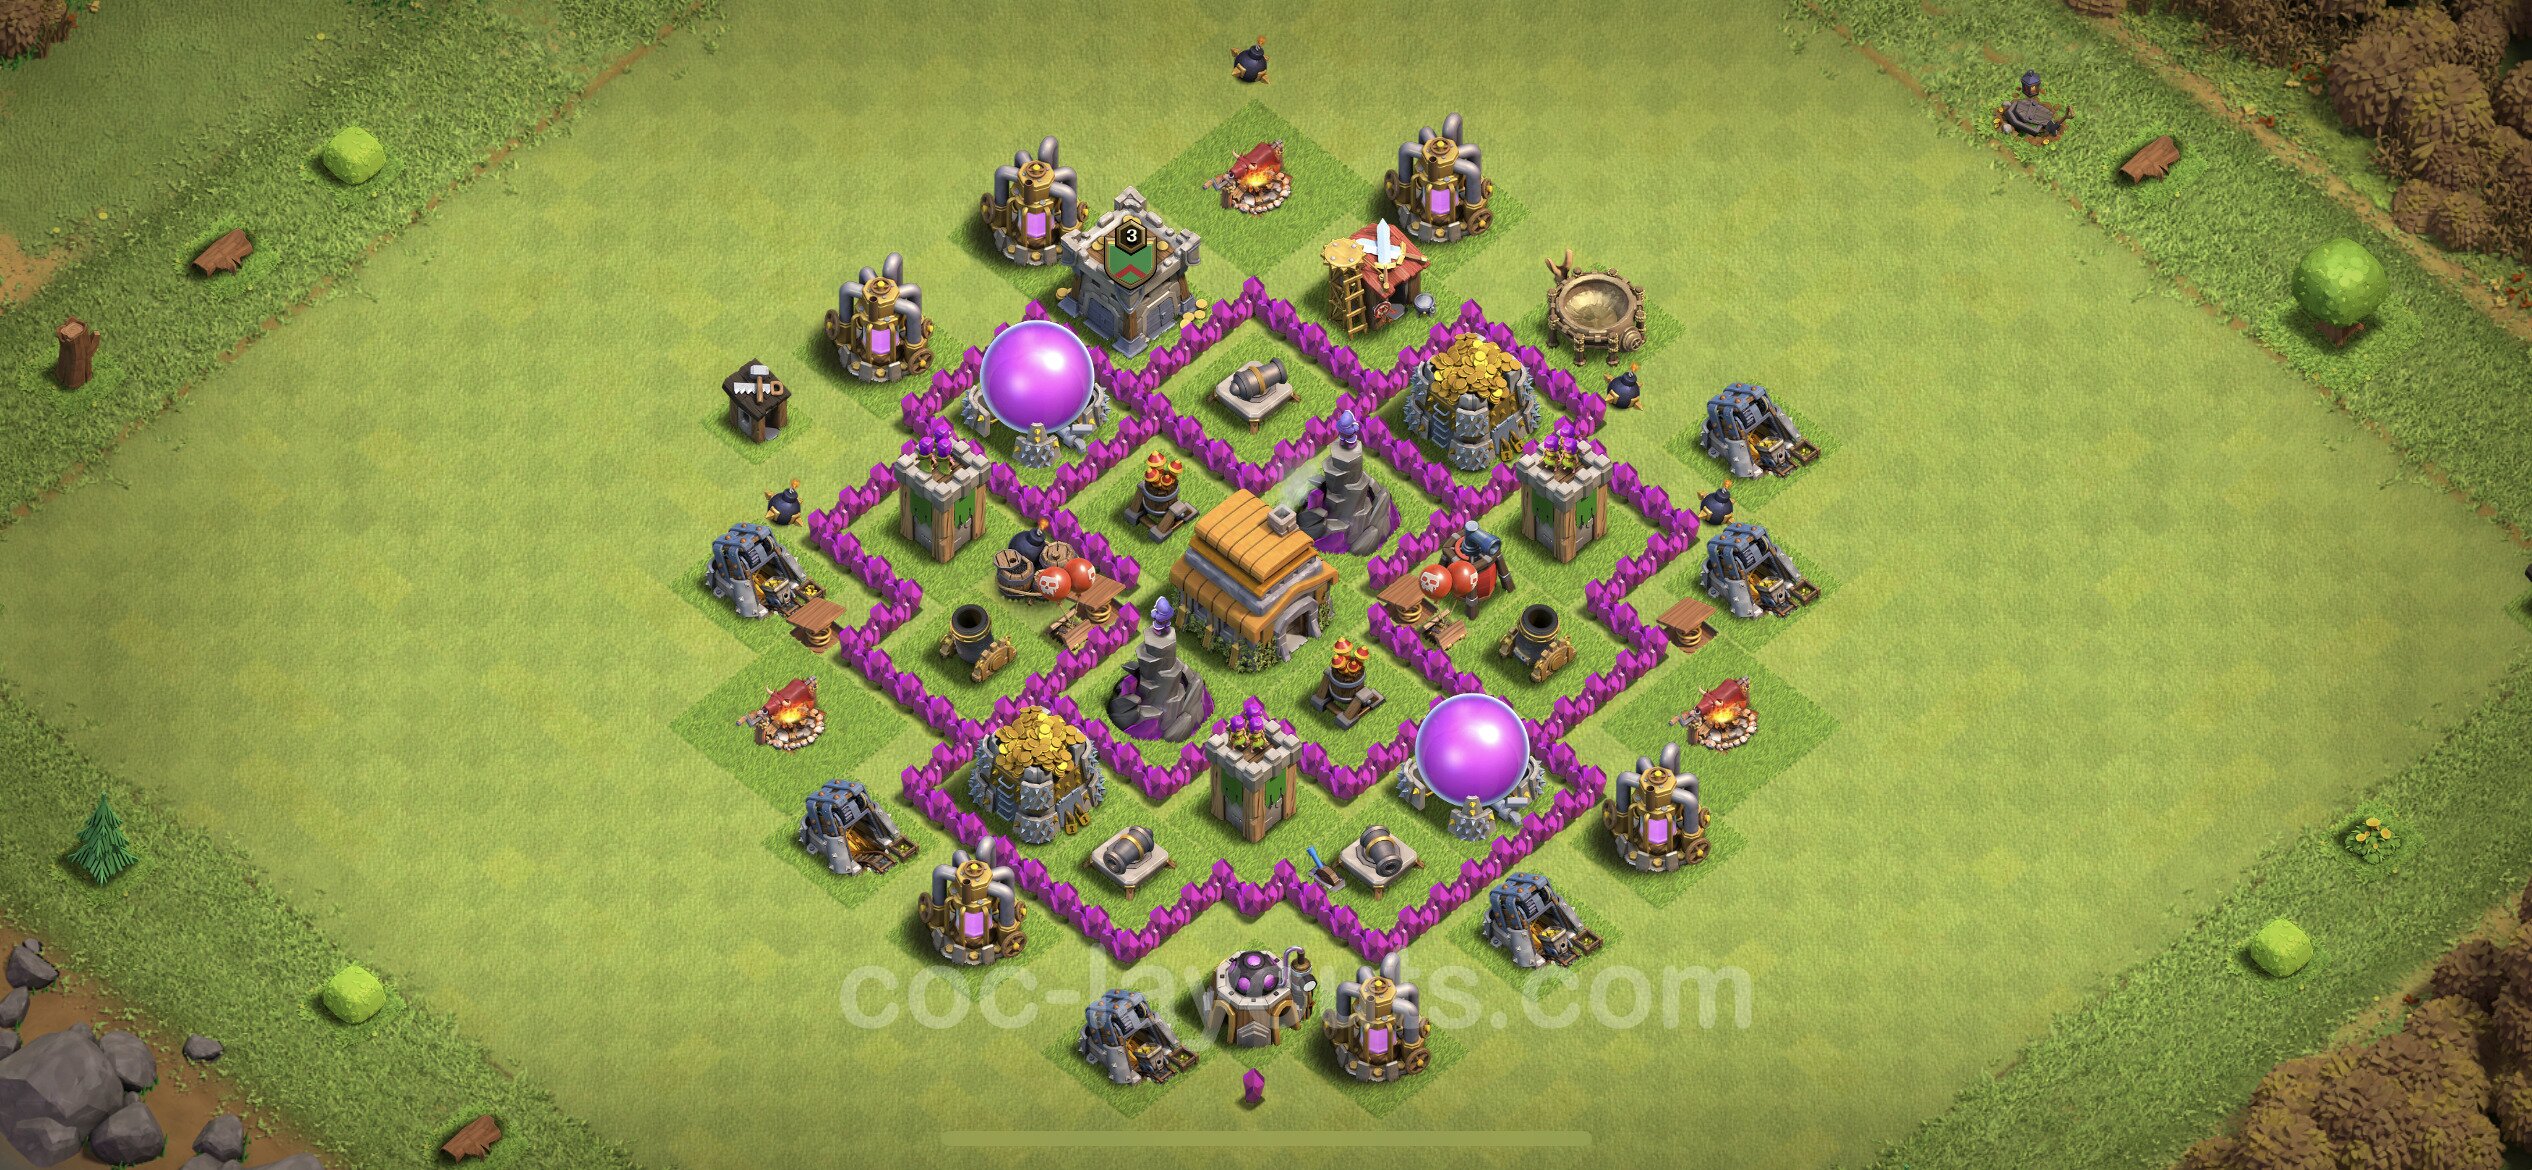 Farming Base TH6 Max Levels with Link, Hybrid, Anti Everything - plan / lay...